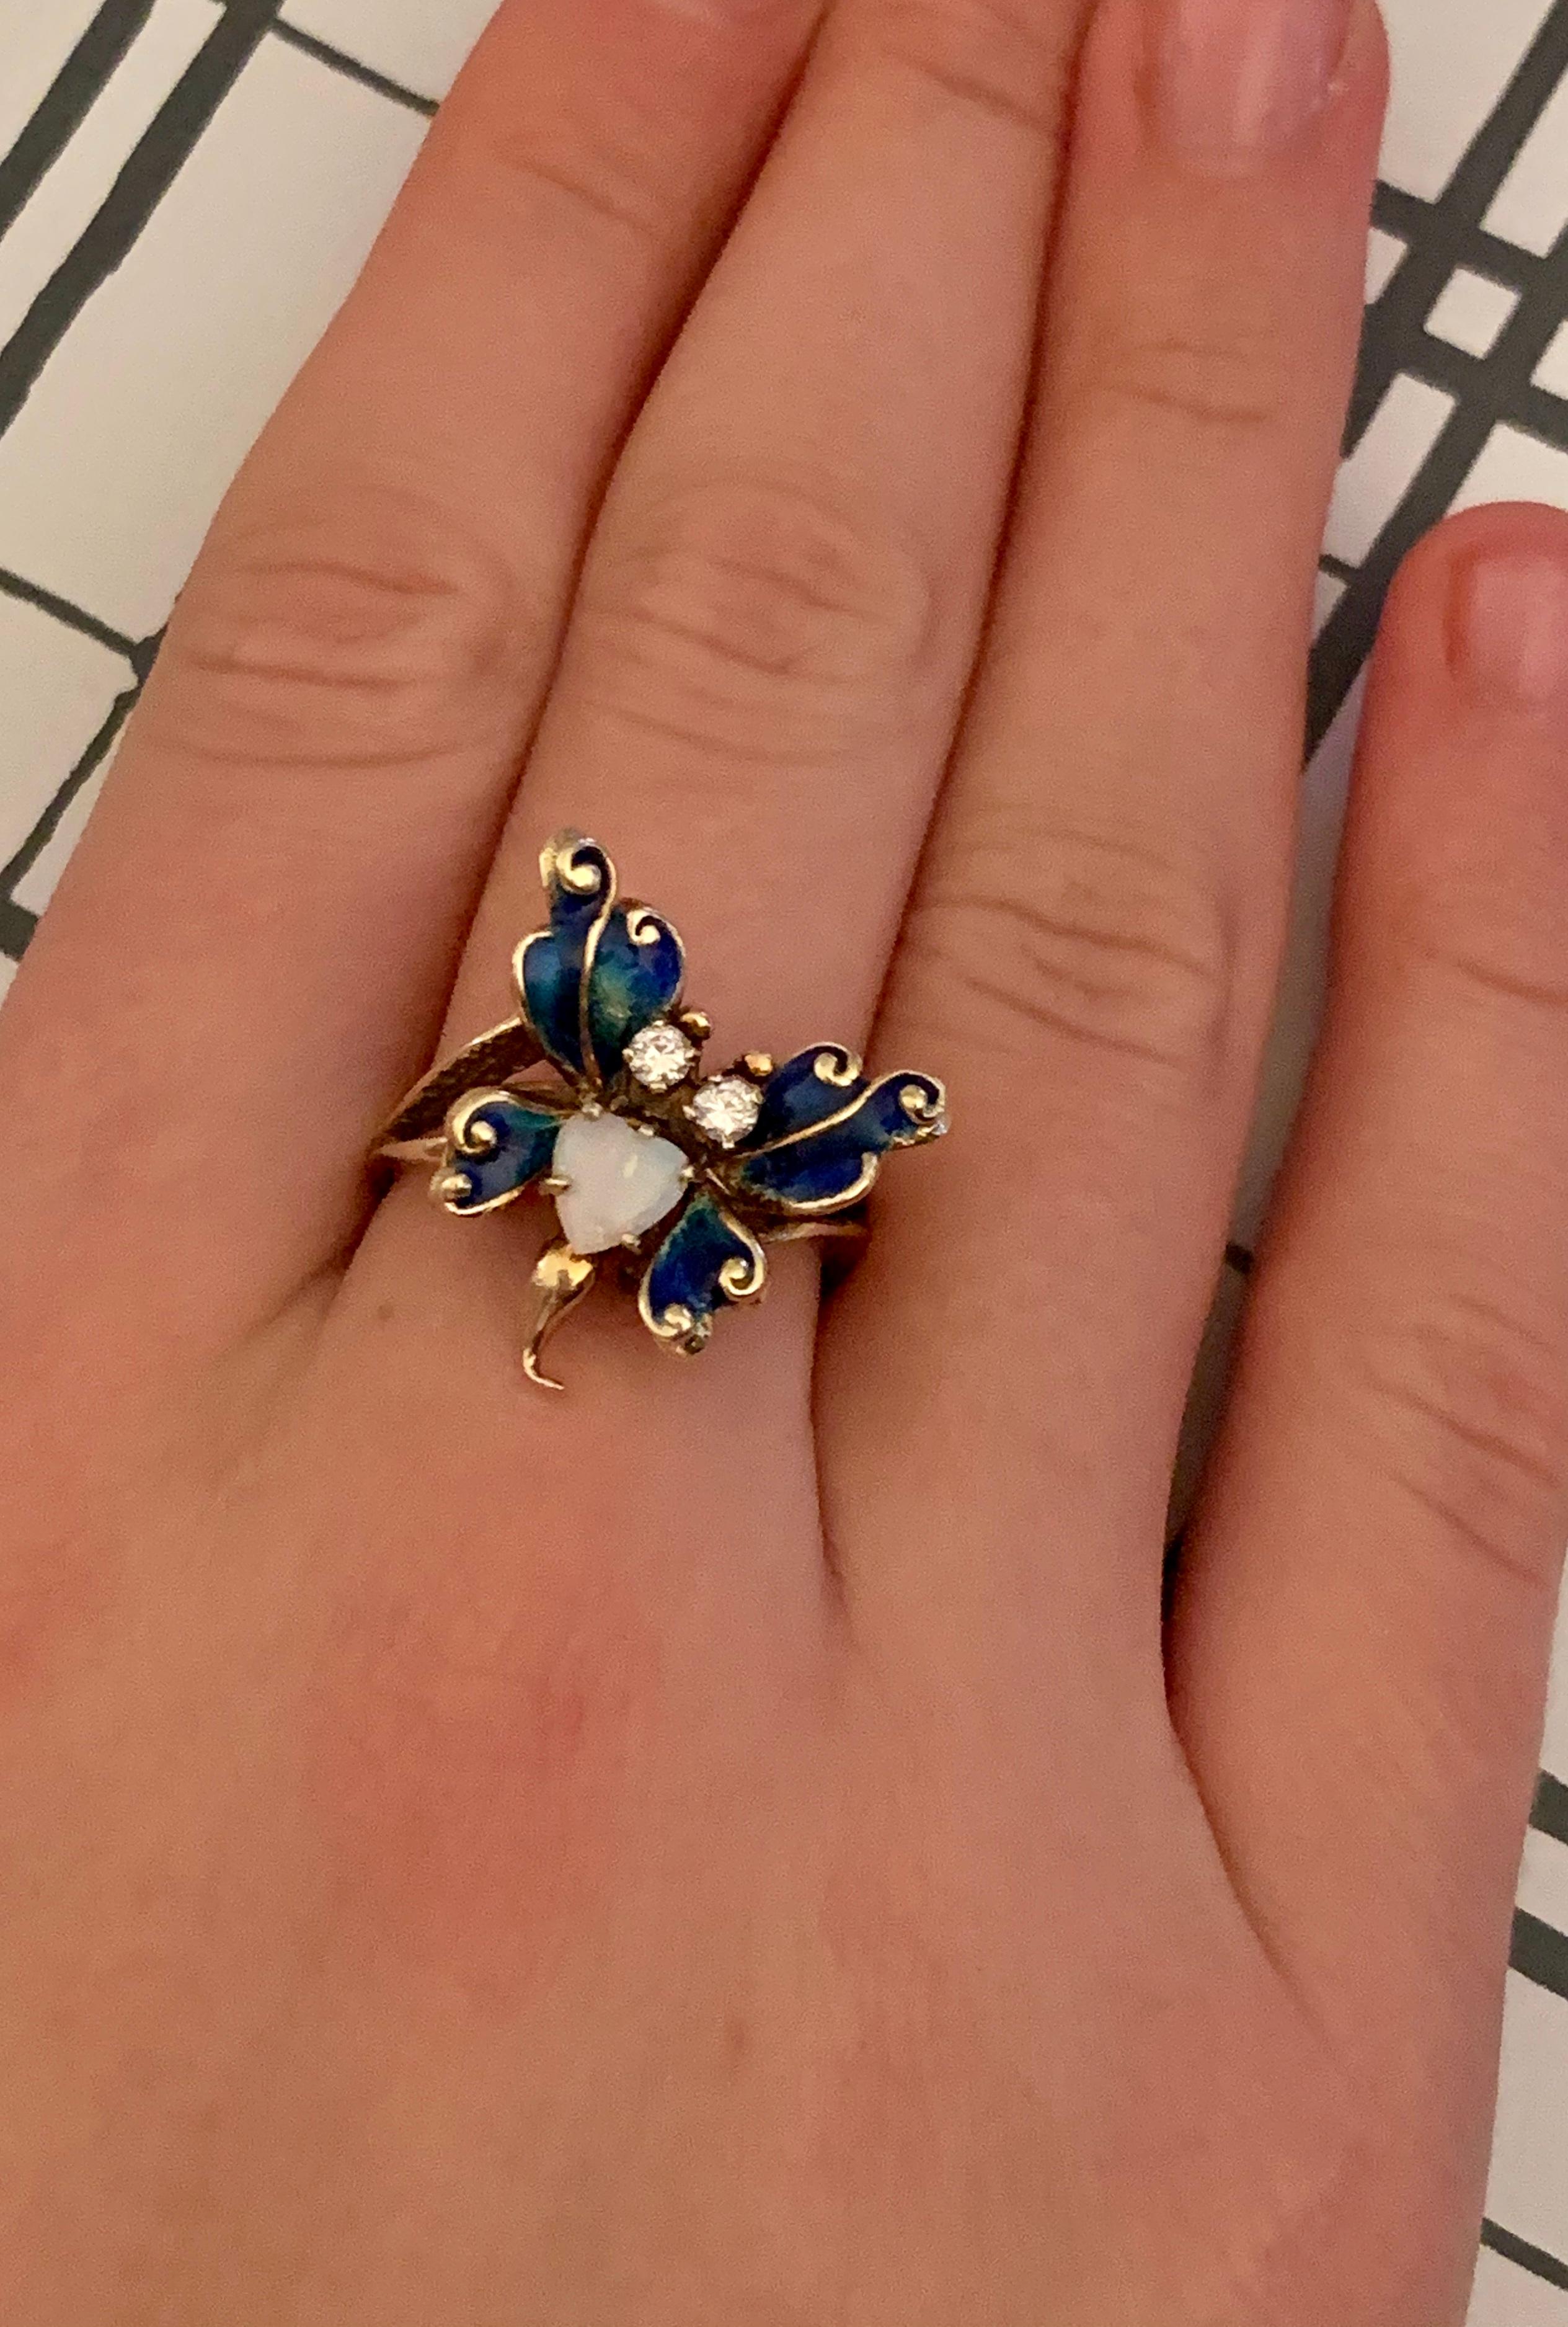 Vintage Diamond, Opal and Enameled Butterfly 14 Karat Yellow Gold Ring 6